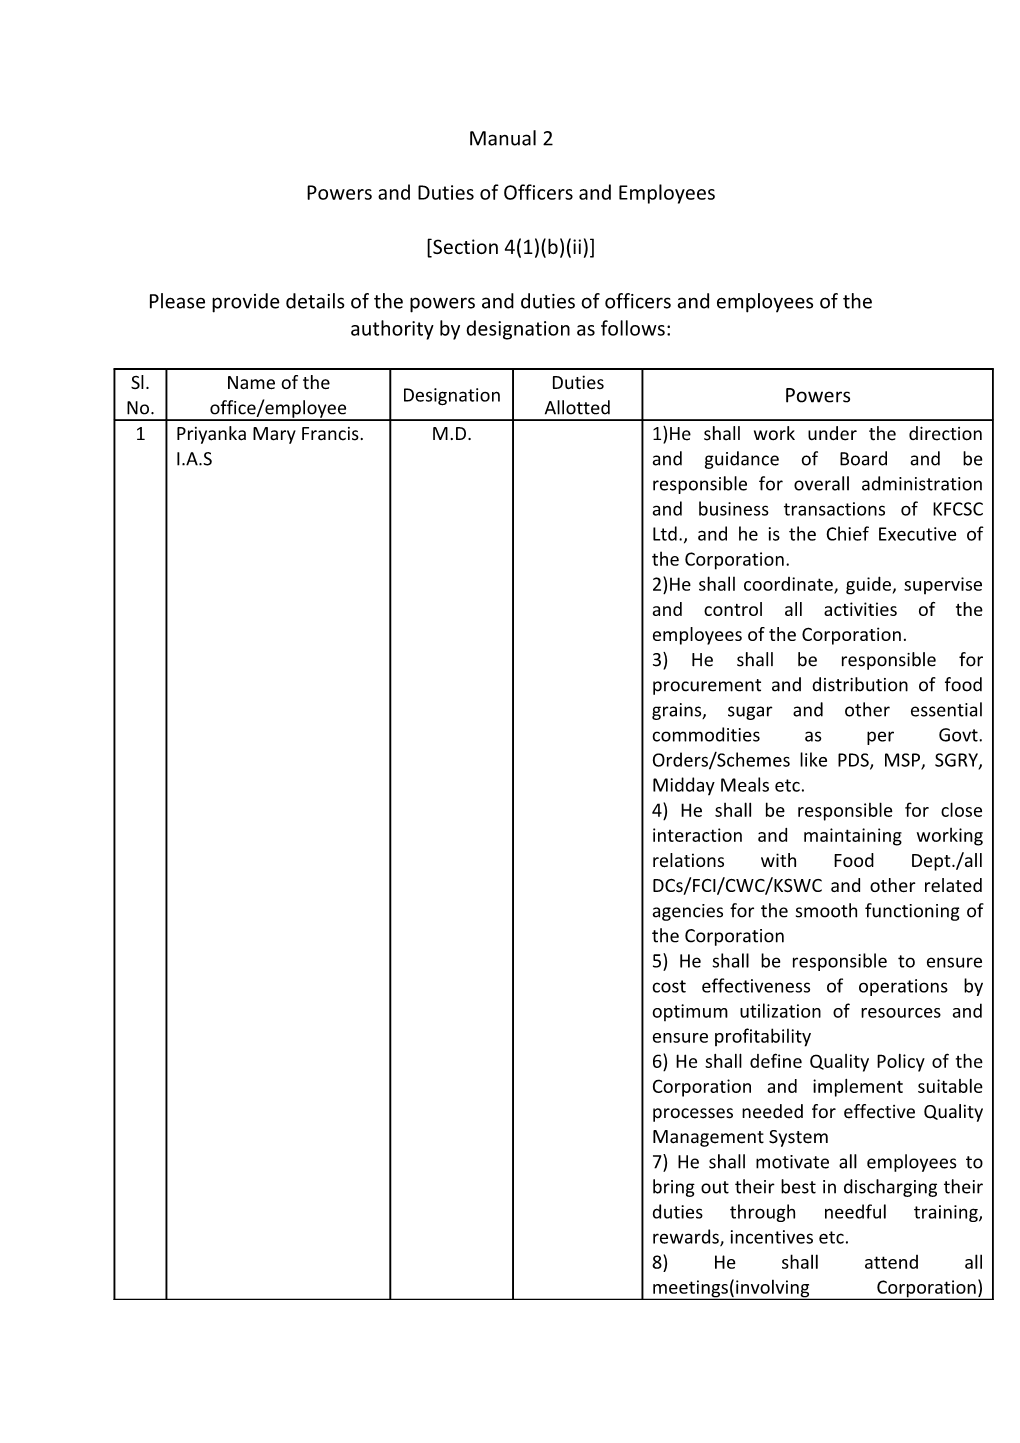 Powers and Duties of Officers and Employees